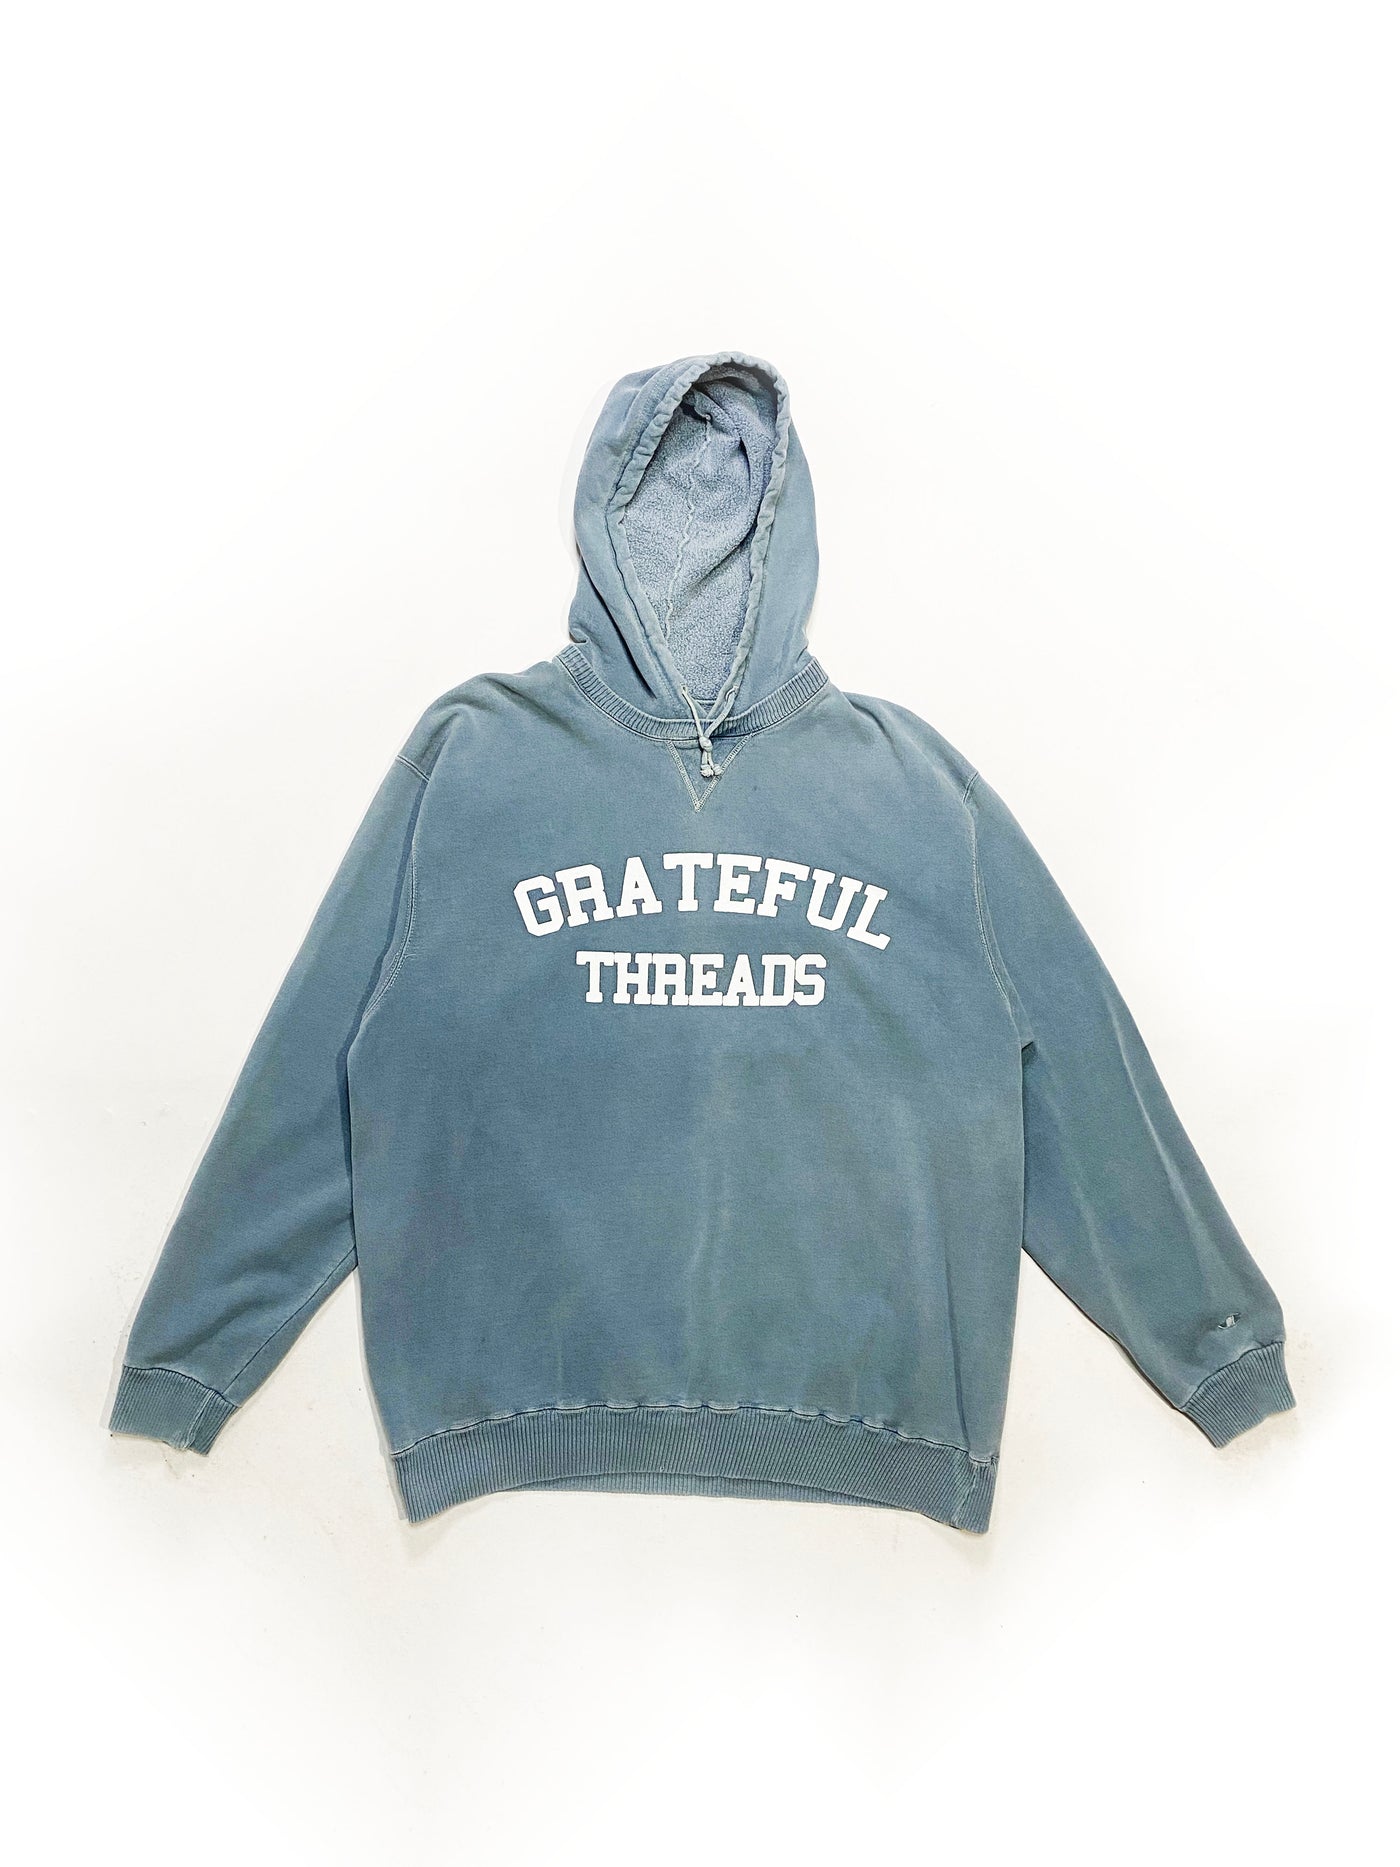 90s Champion Grateful Threads Spellout Hoodie - Light Blue - Size L